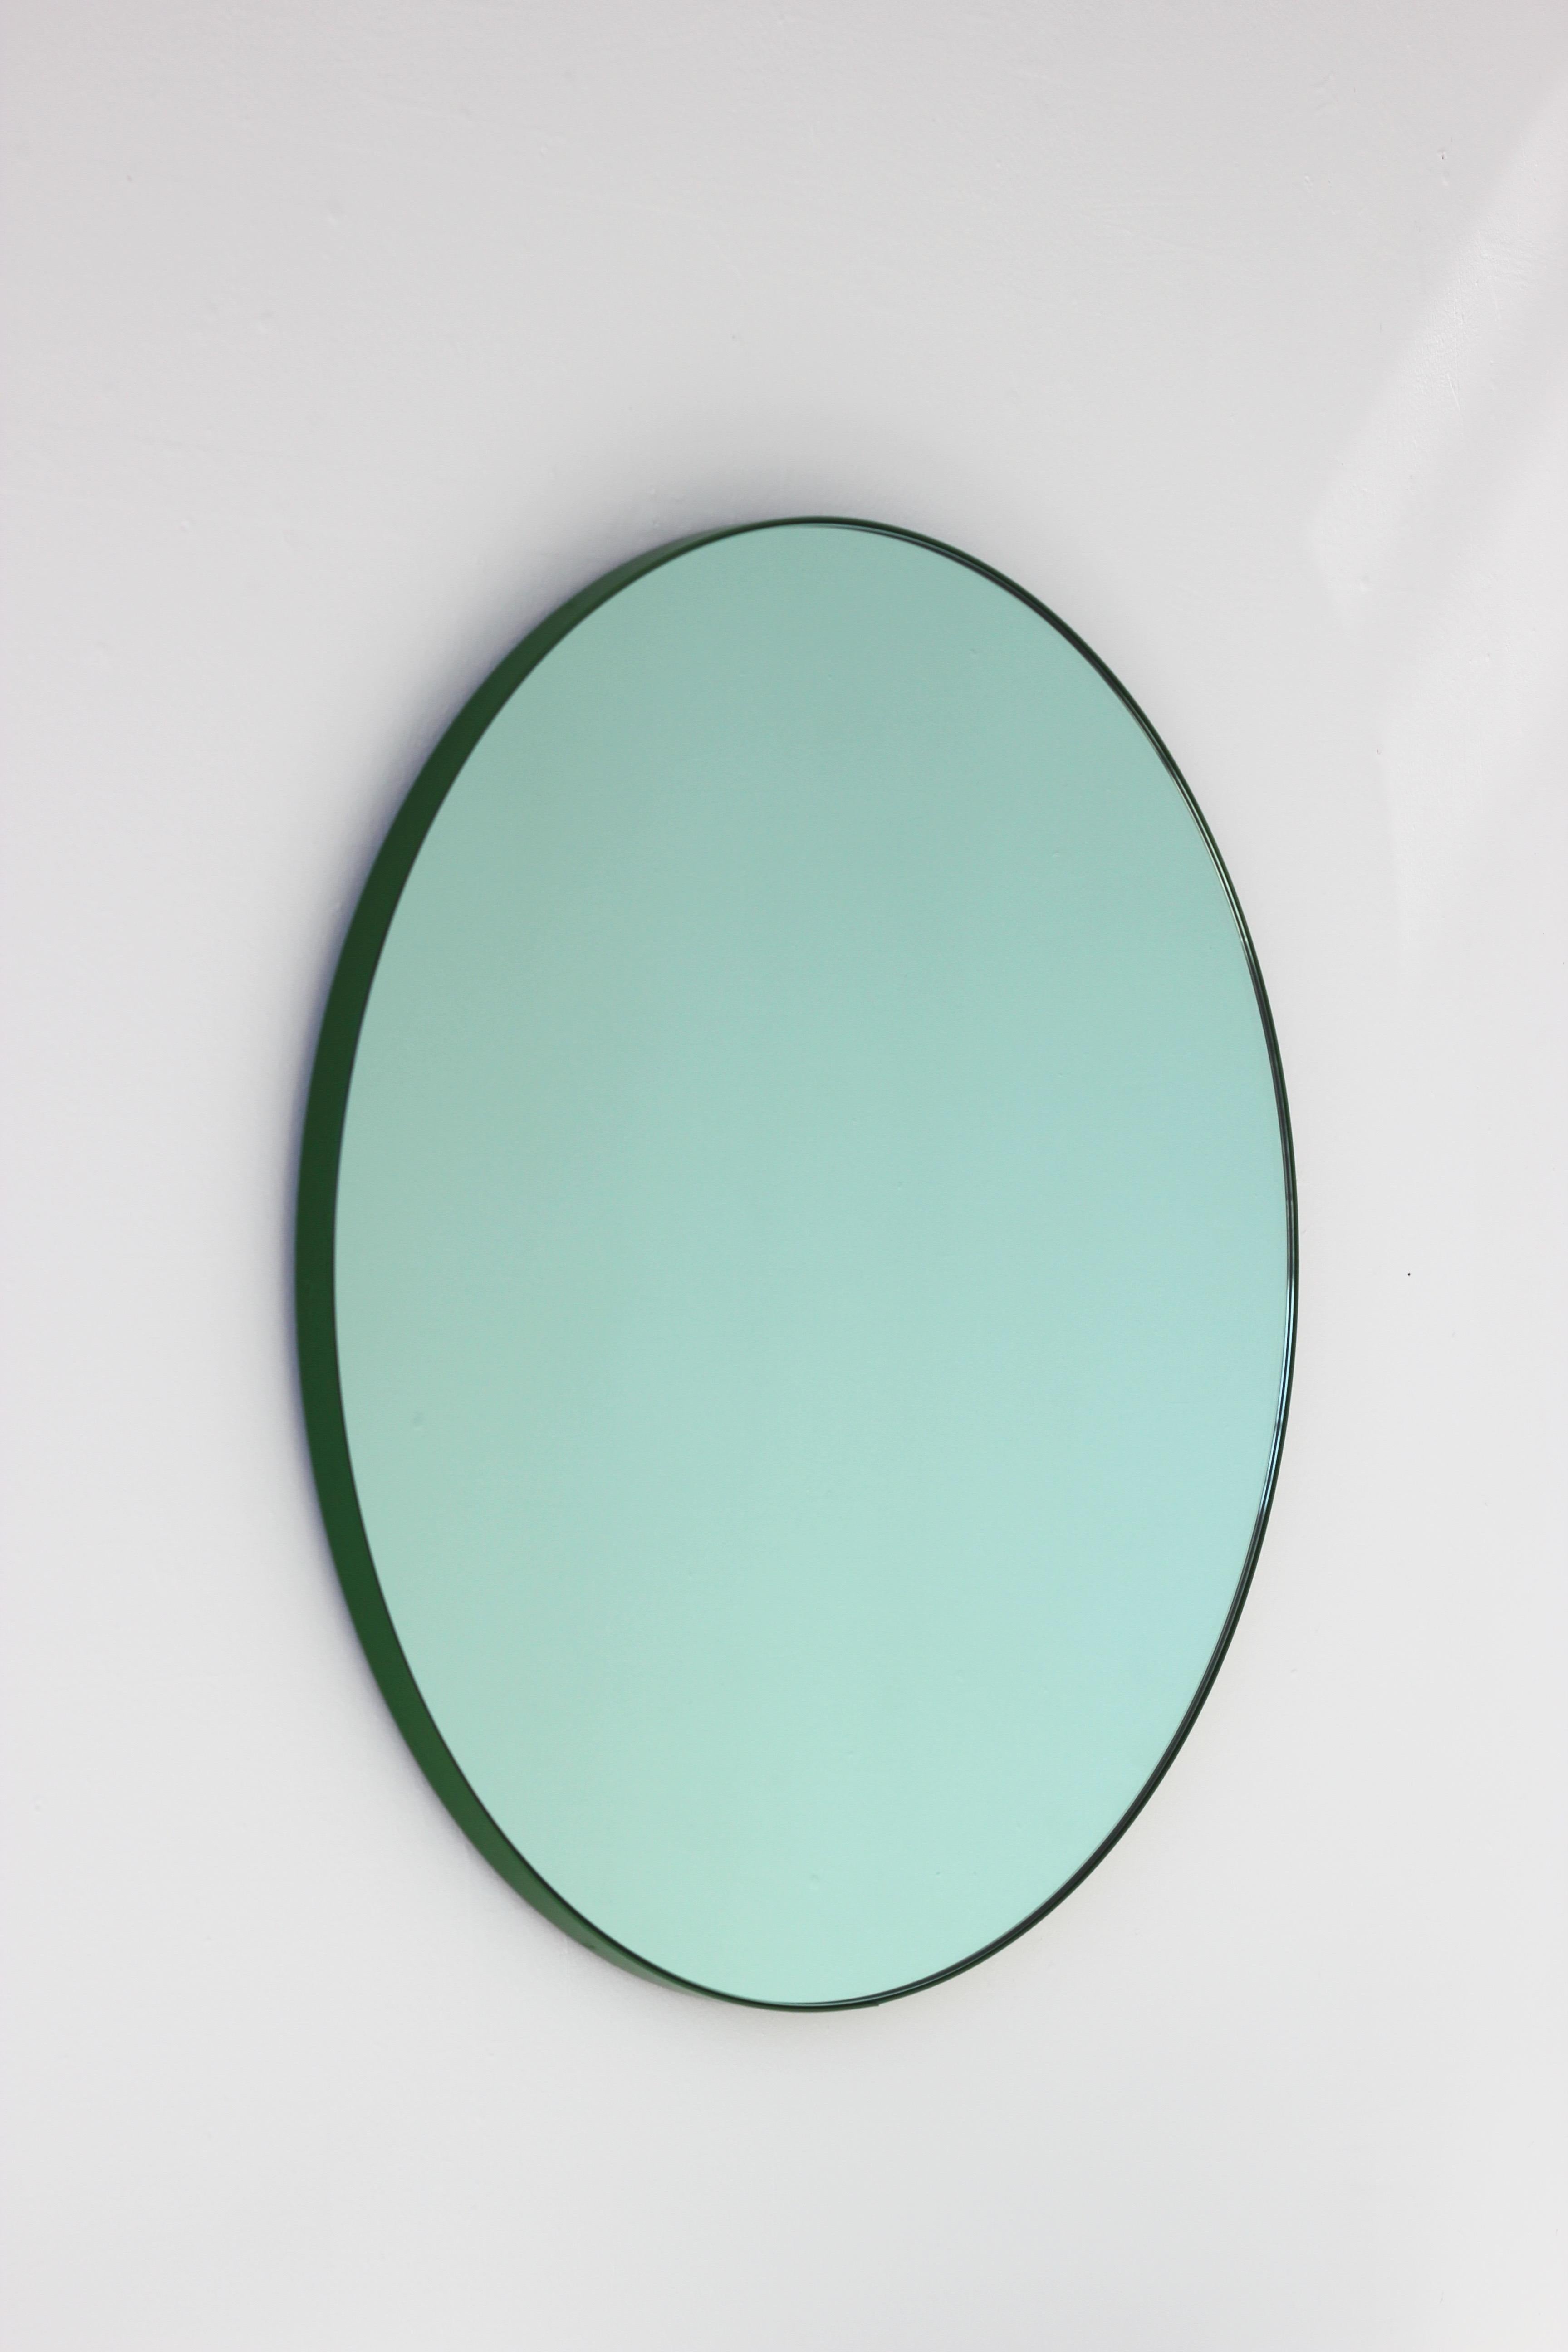 Contemporary Orbis Green Tinted Customisable Round Mirror with Green Frame, Small